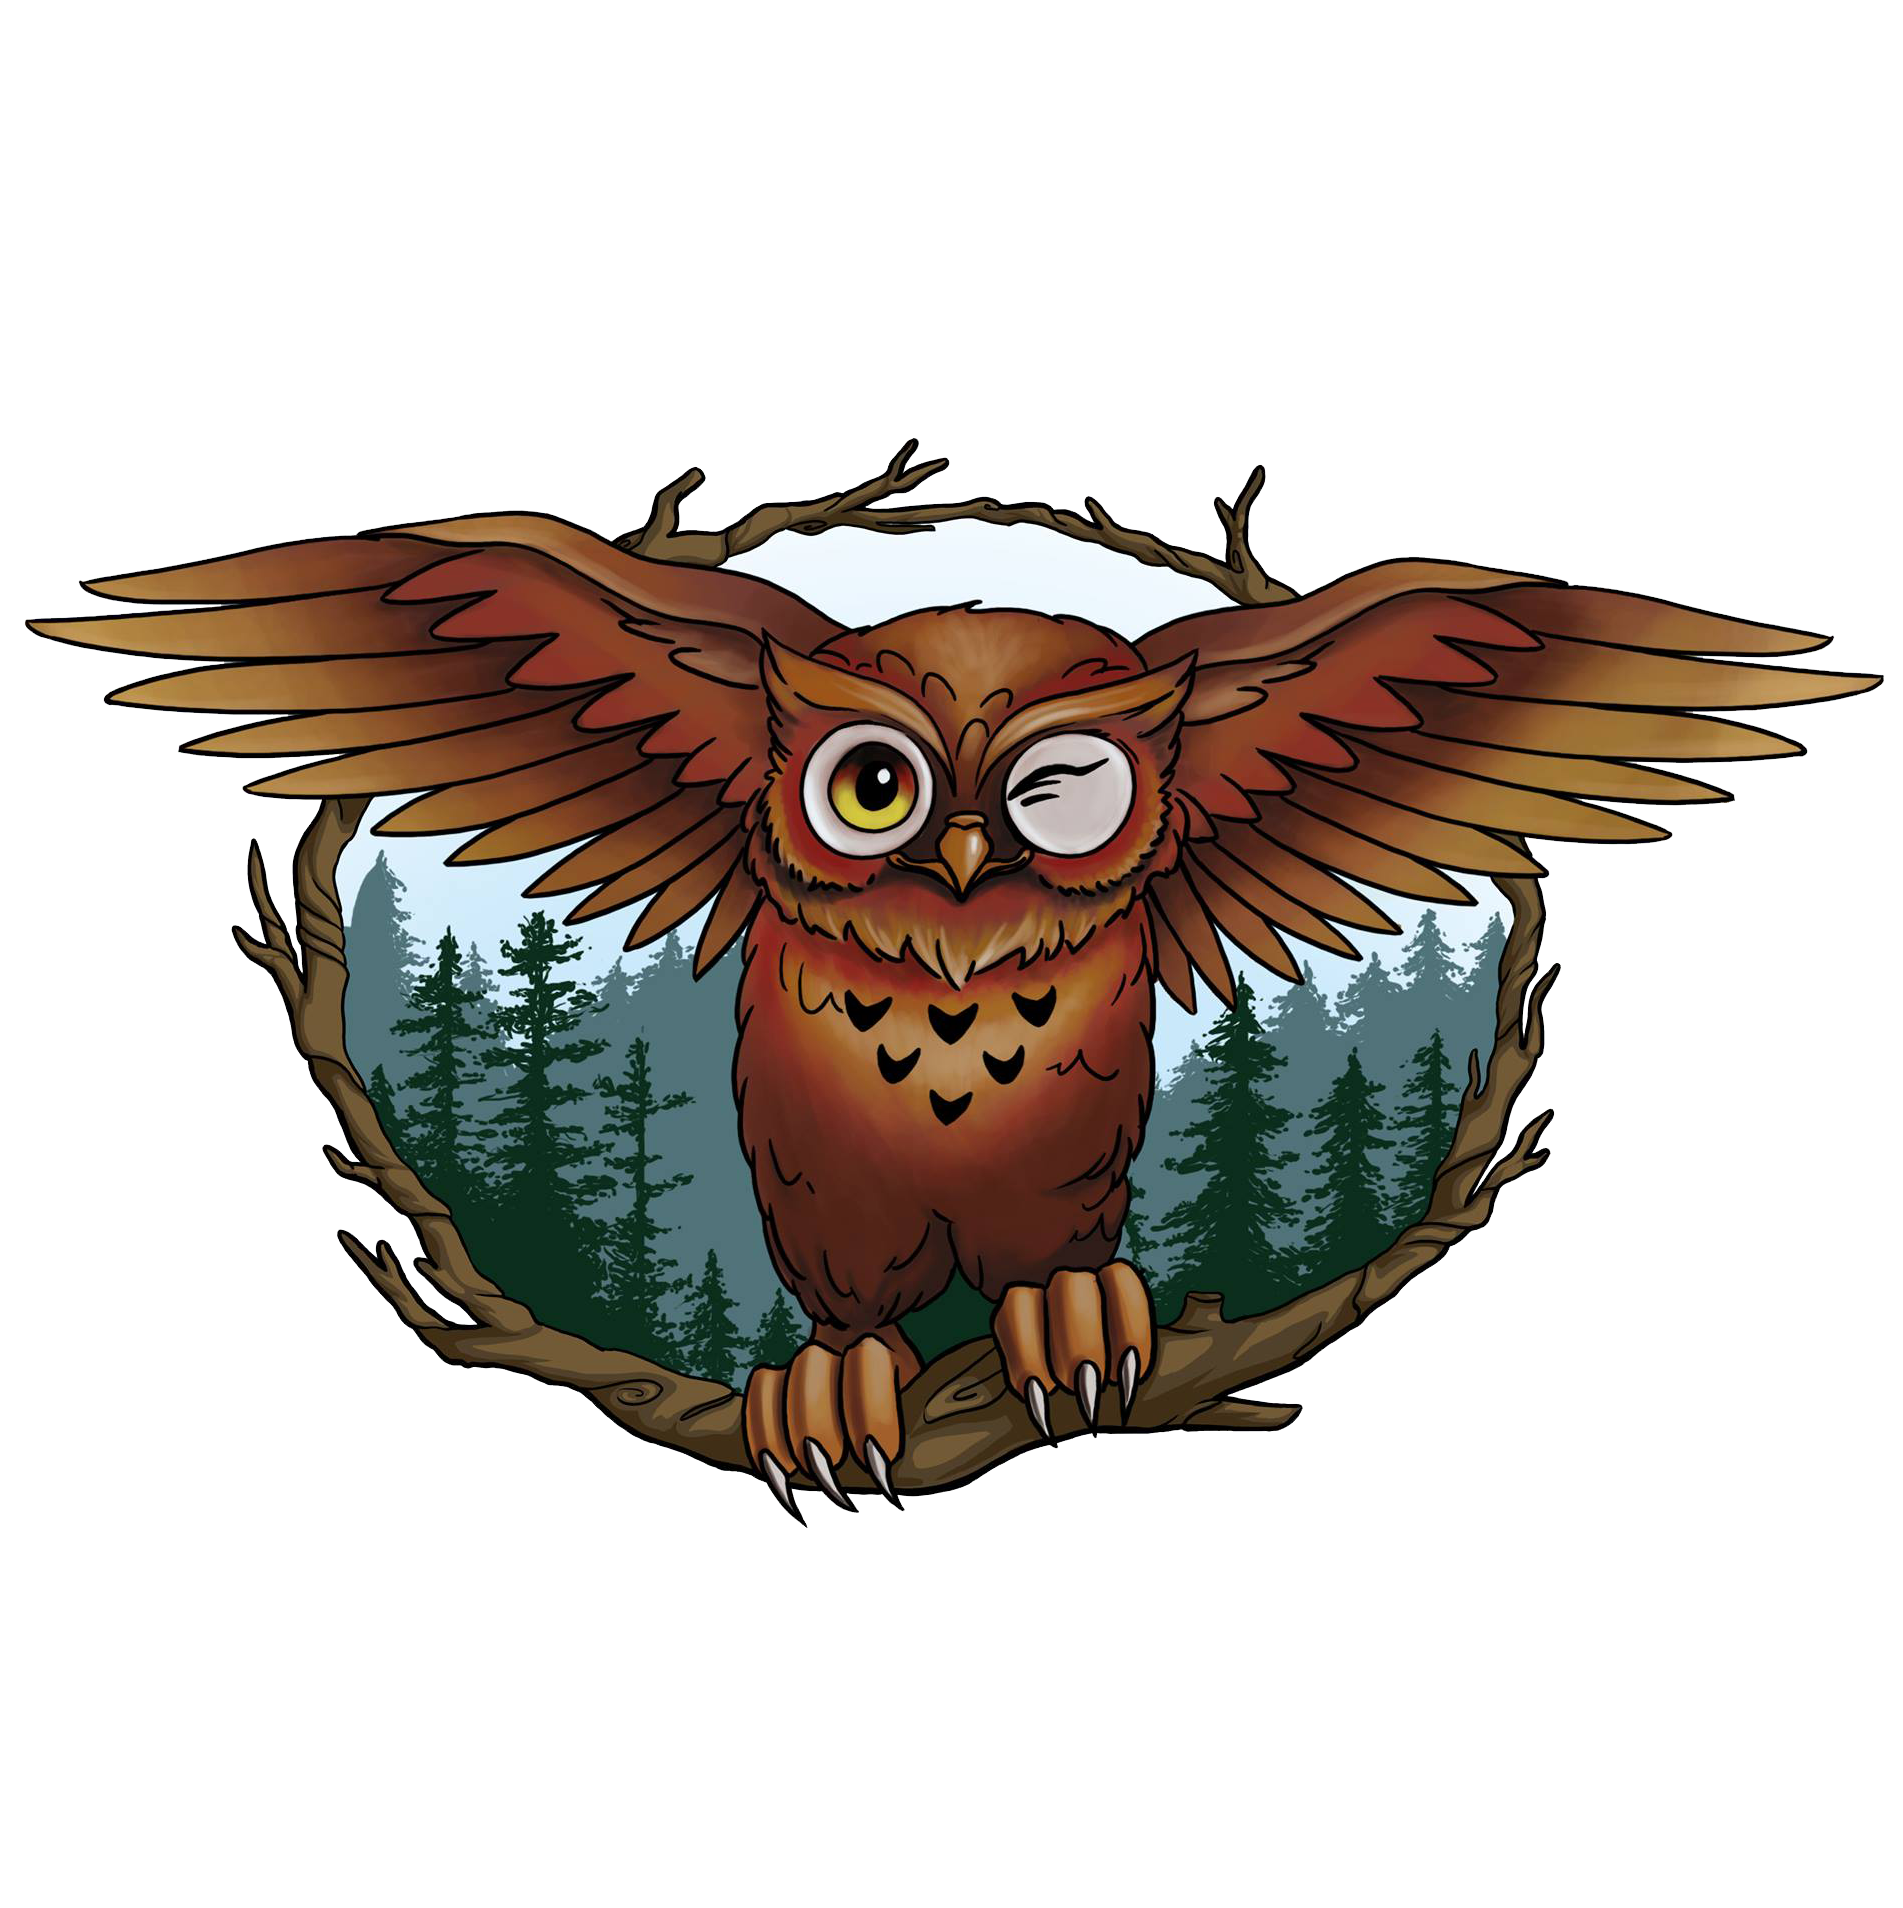 Home - The Brown Owl